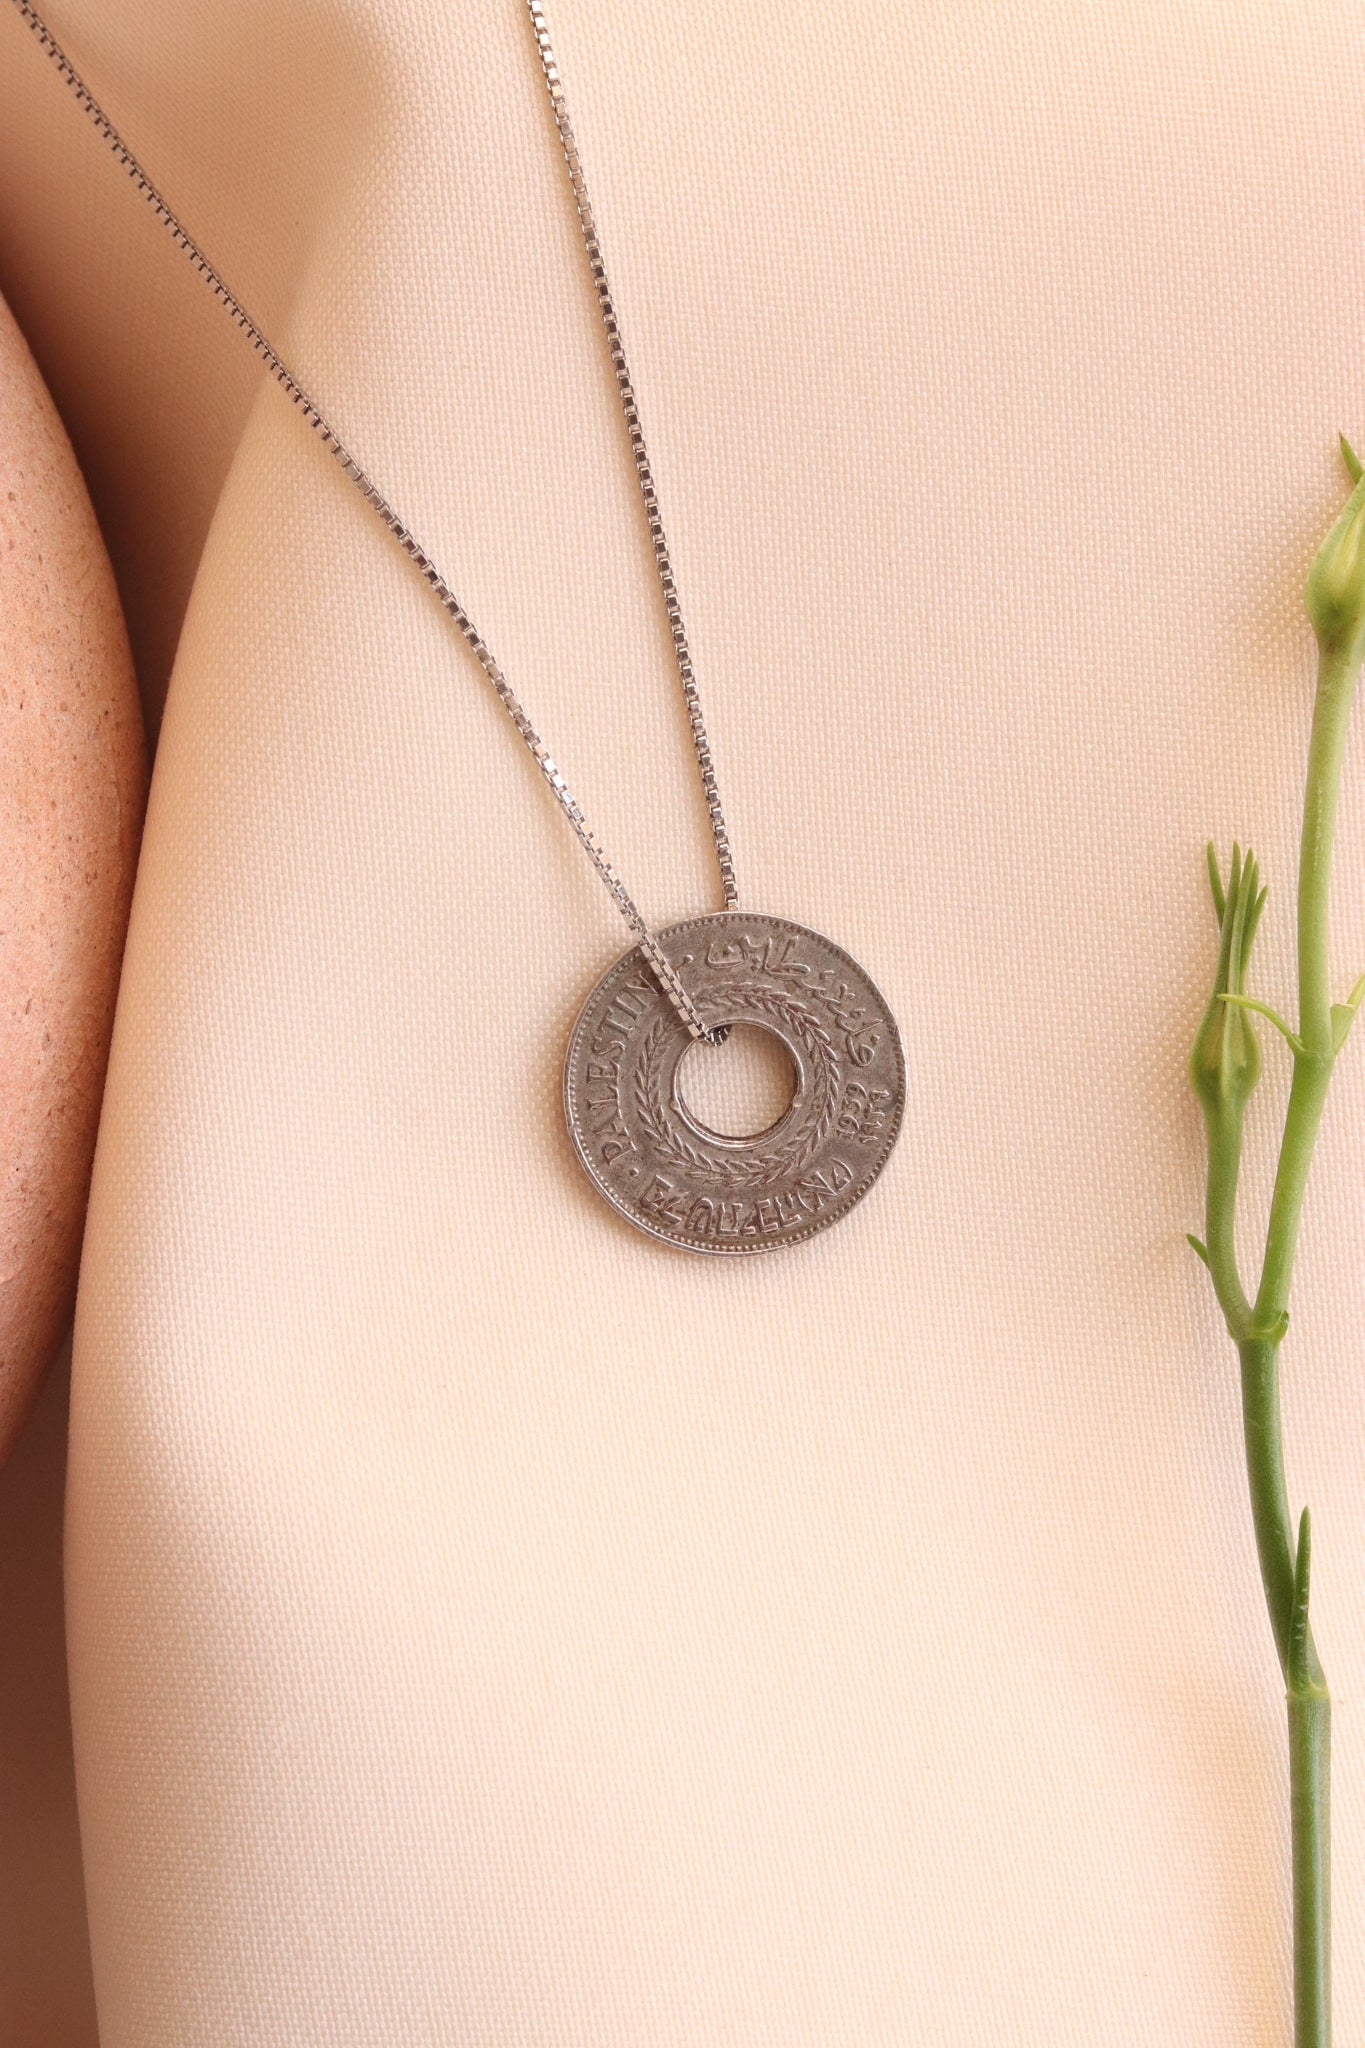 Palestinian coin 5 mil silver necklace